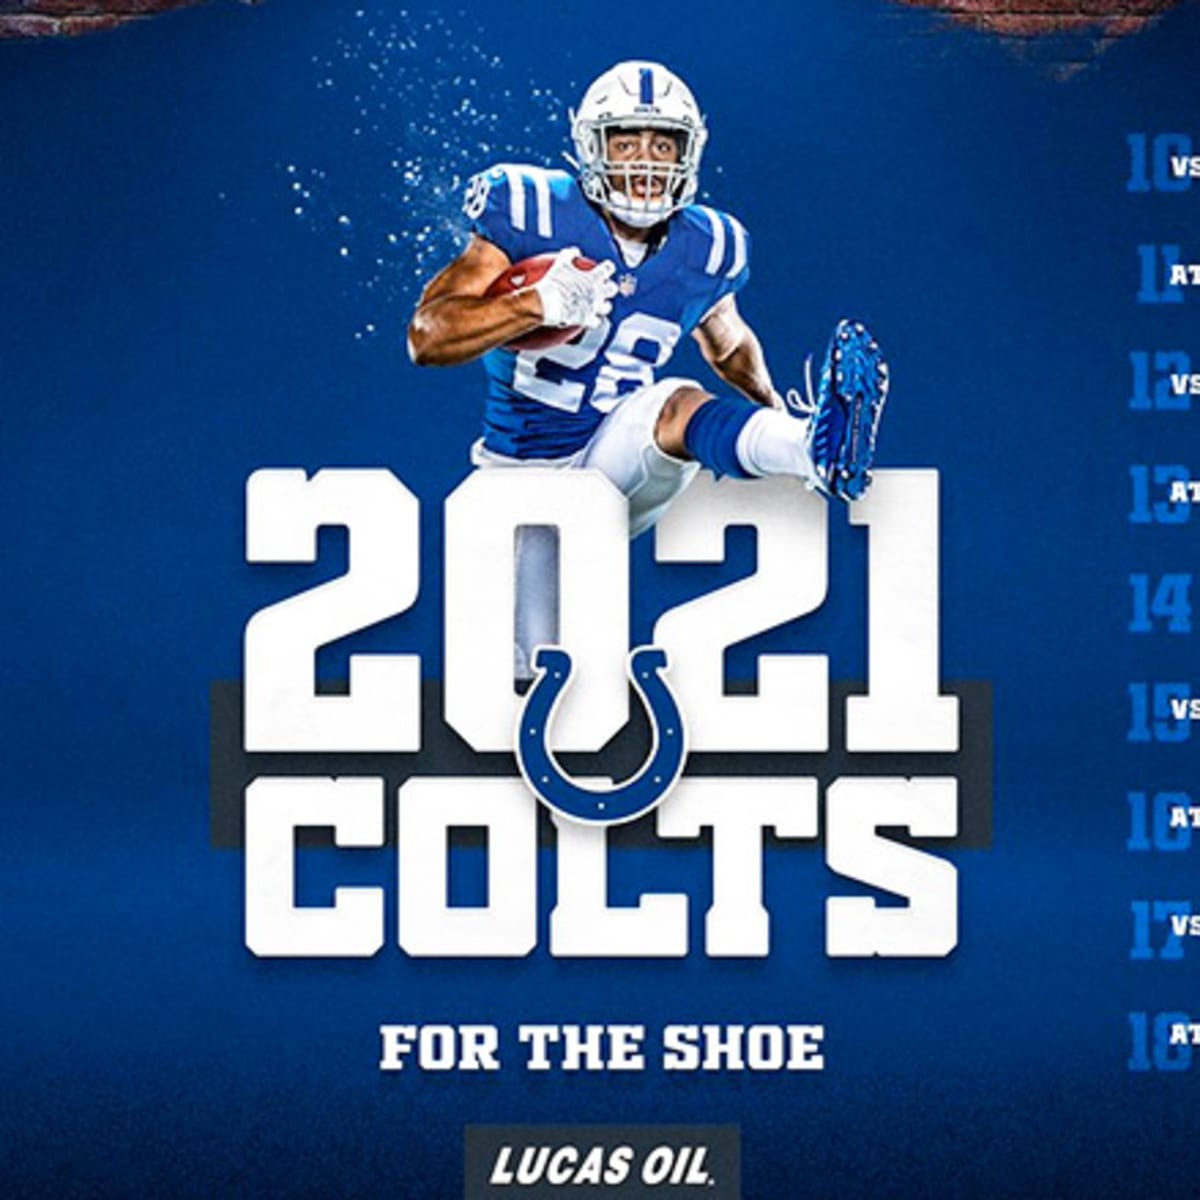 Indianapolis Colts Schedule 2022 Indianapolis Colts Schedule 2021 - Athlonsports.com | Expert Predictions,  Picks, And Previews